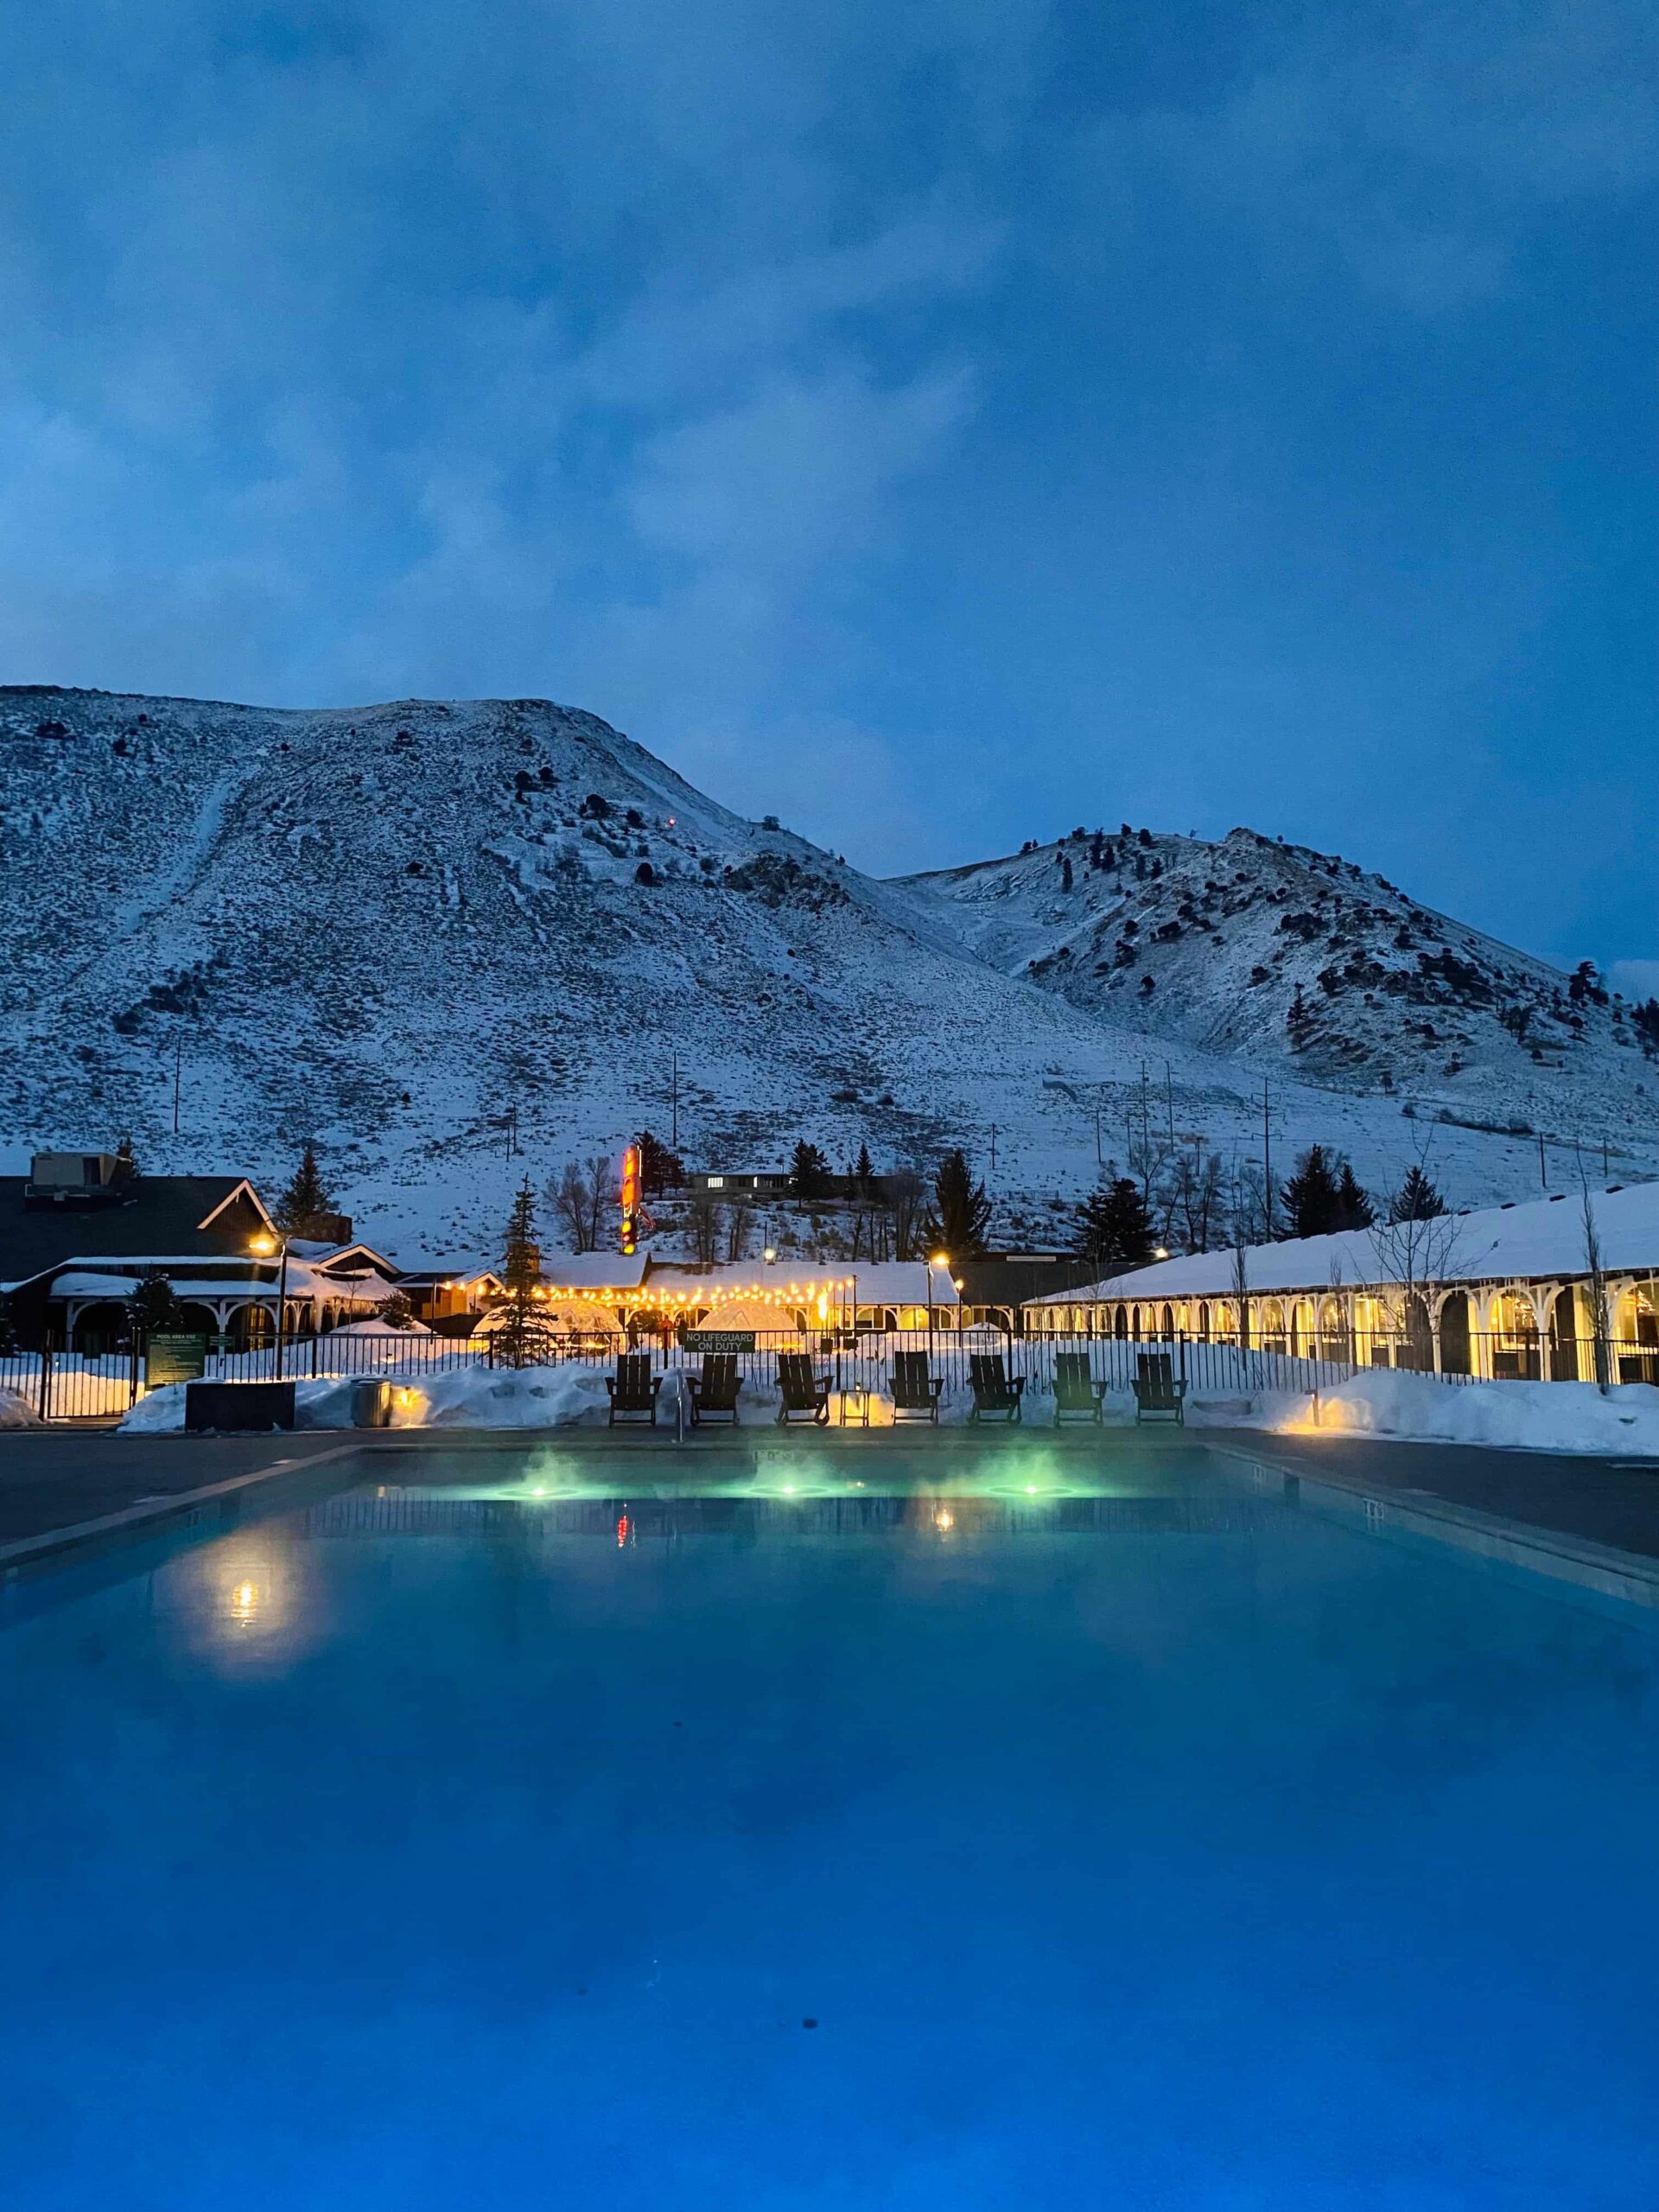 The snowy mountain backdrop enhances the awesome pool area night view with dazzling lightning.